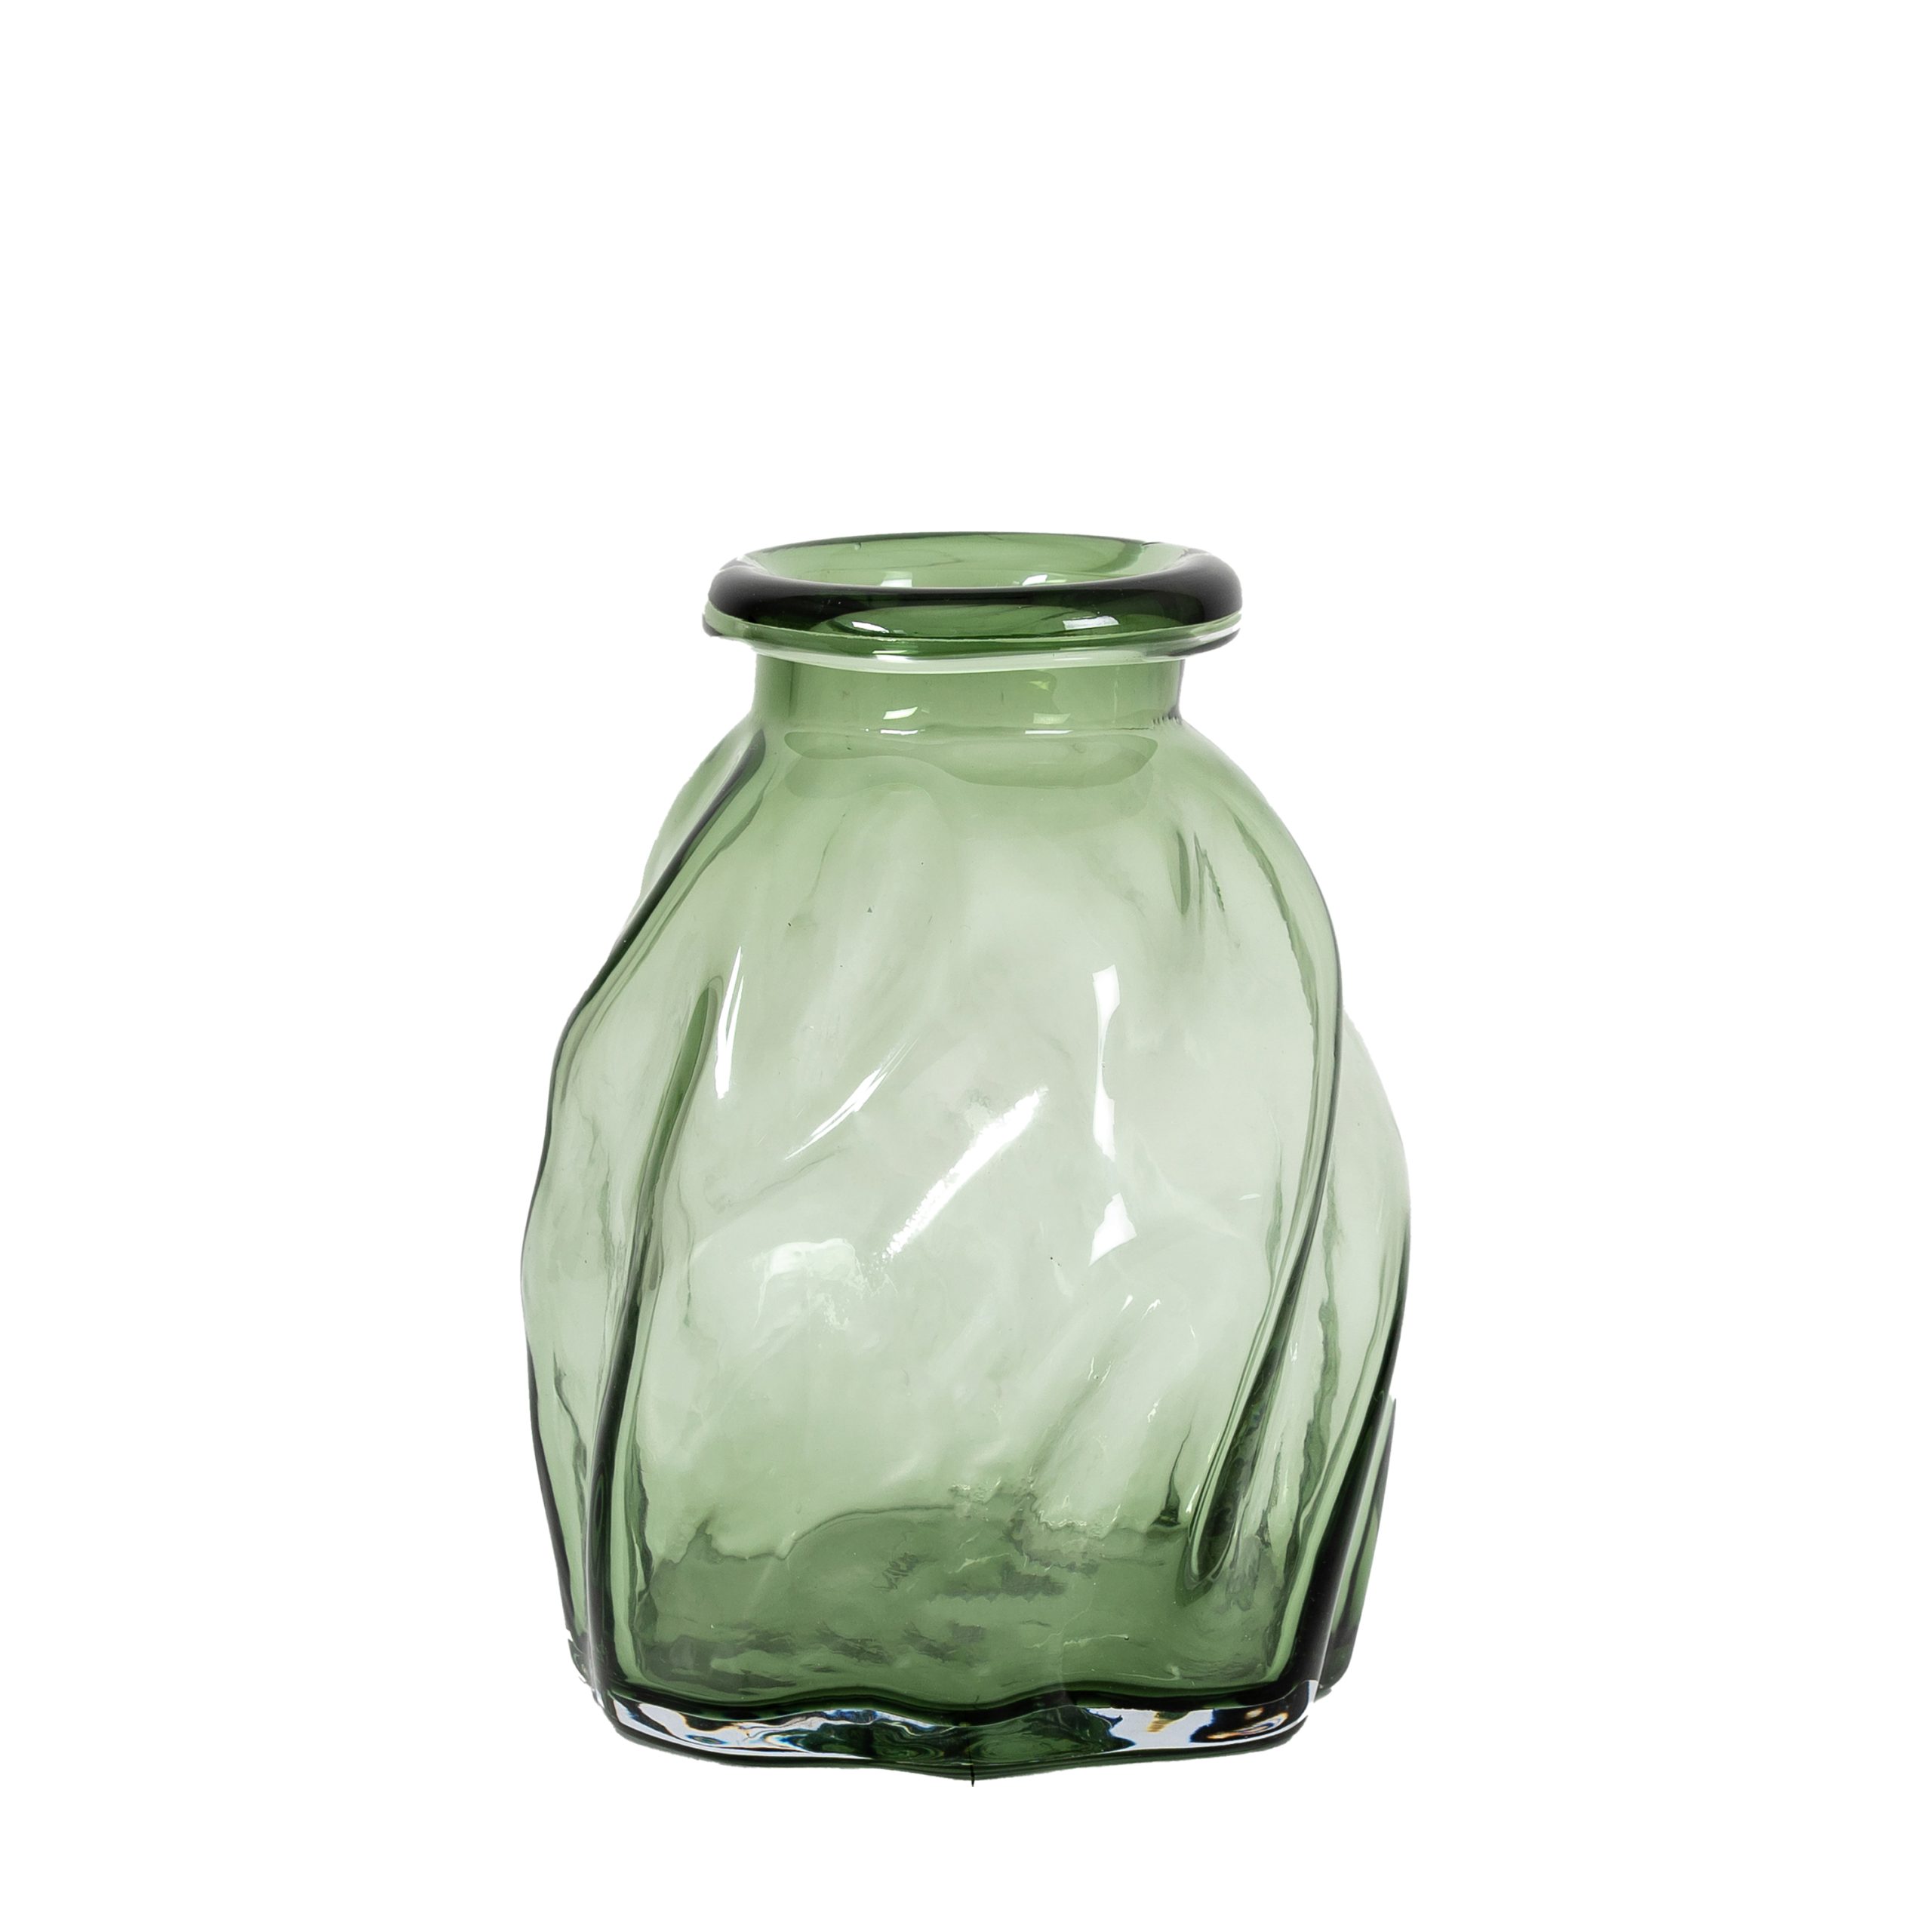 Gallery Direct Severn Vase Small Green